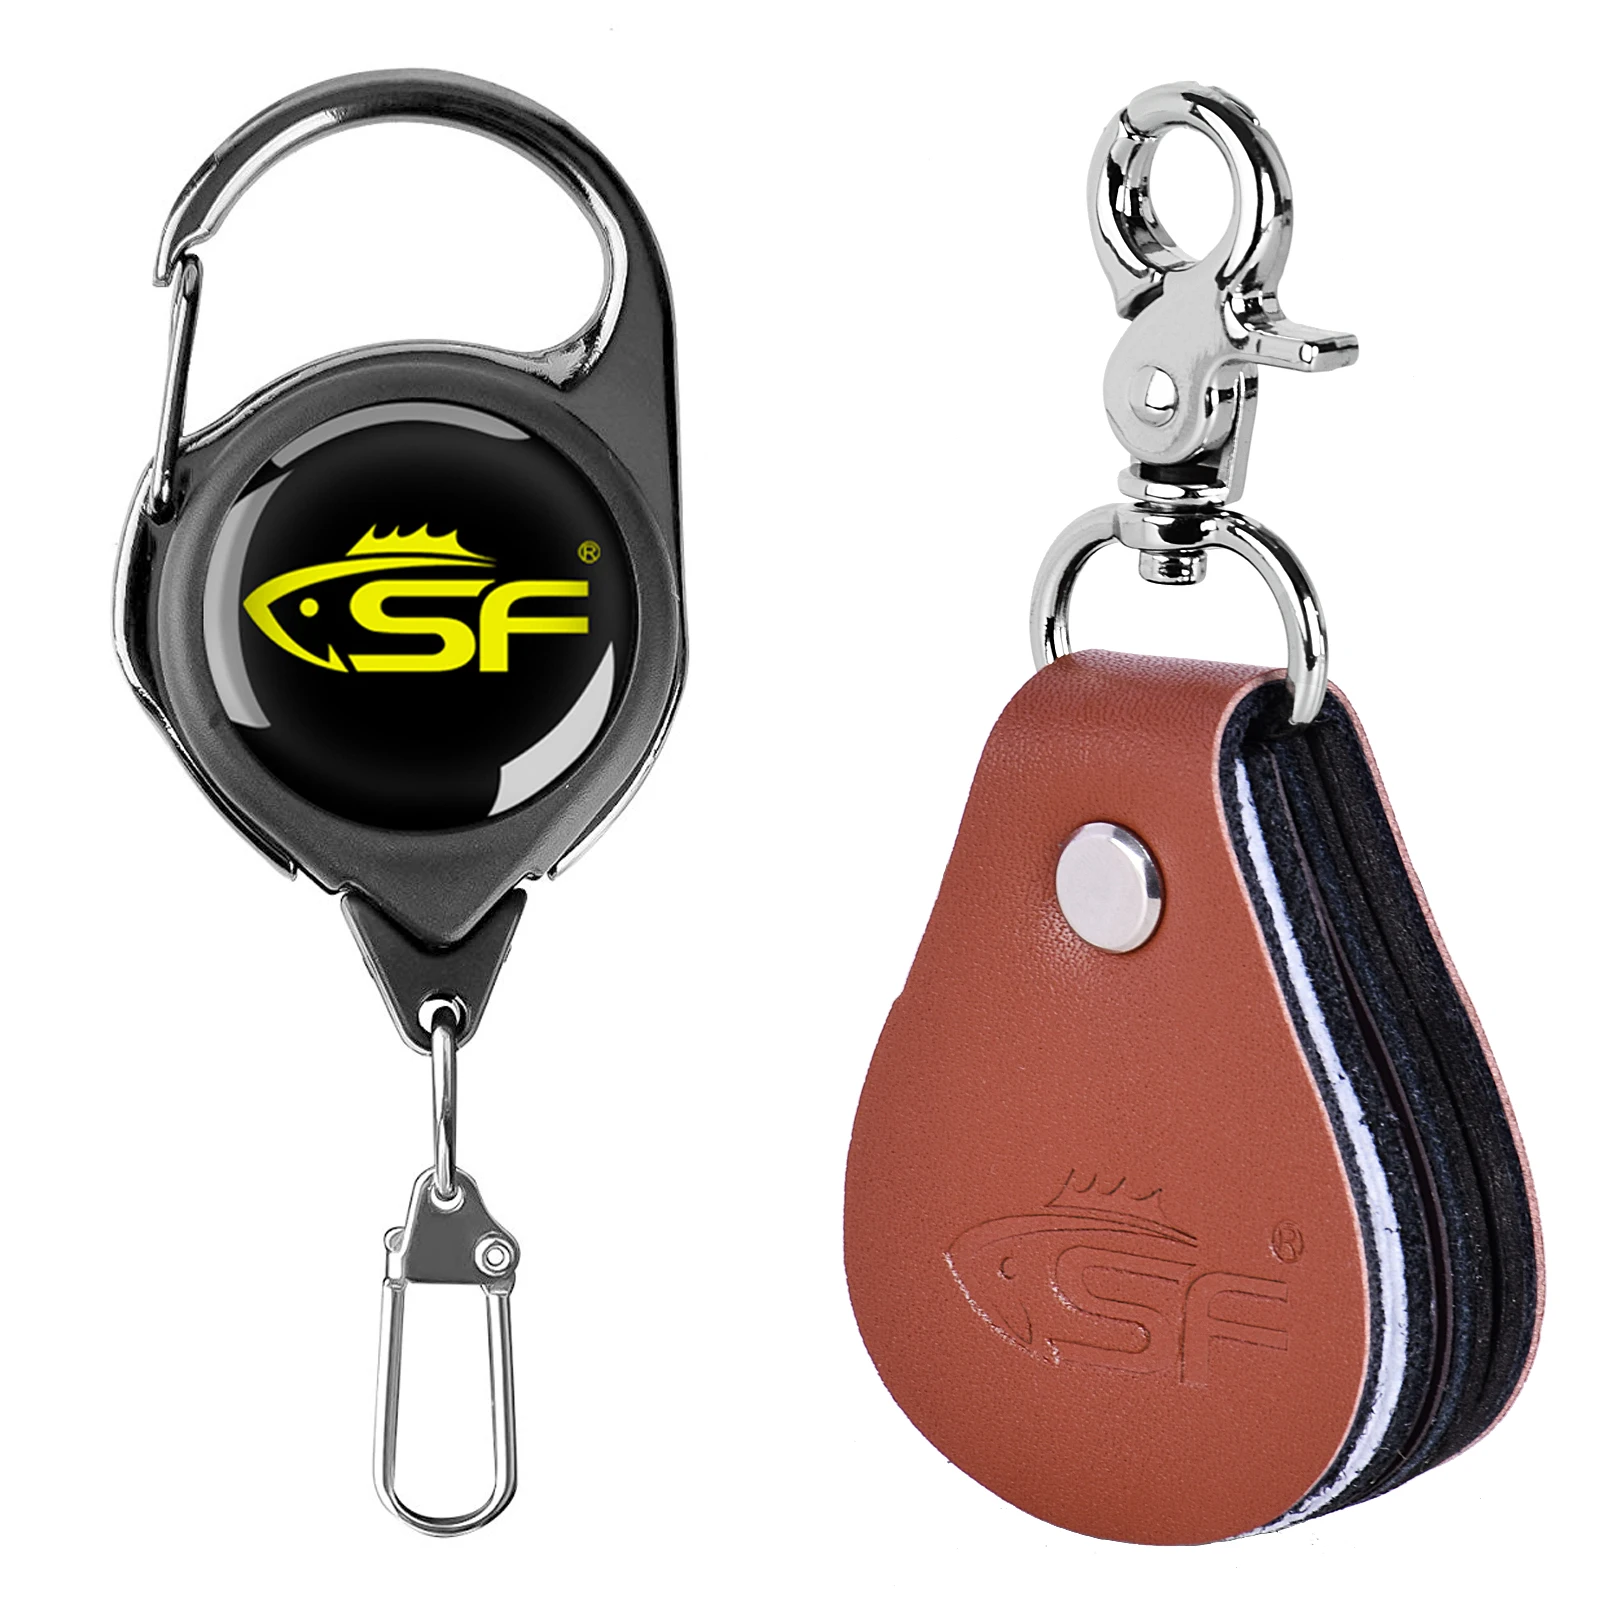 SF 3 in 1 Fly Fishing Leader Straightener and Line Cleaner with